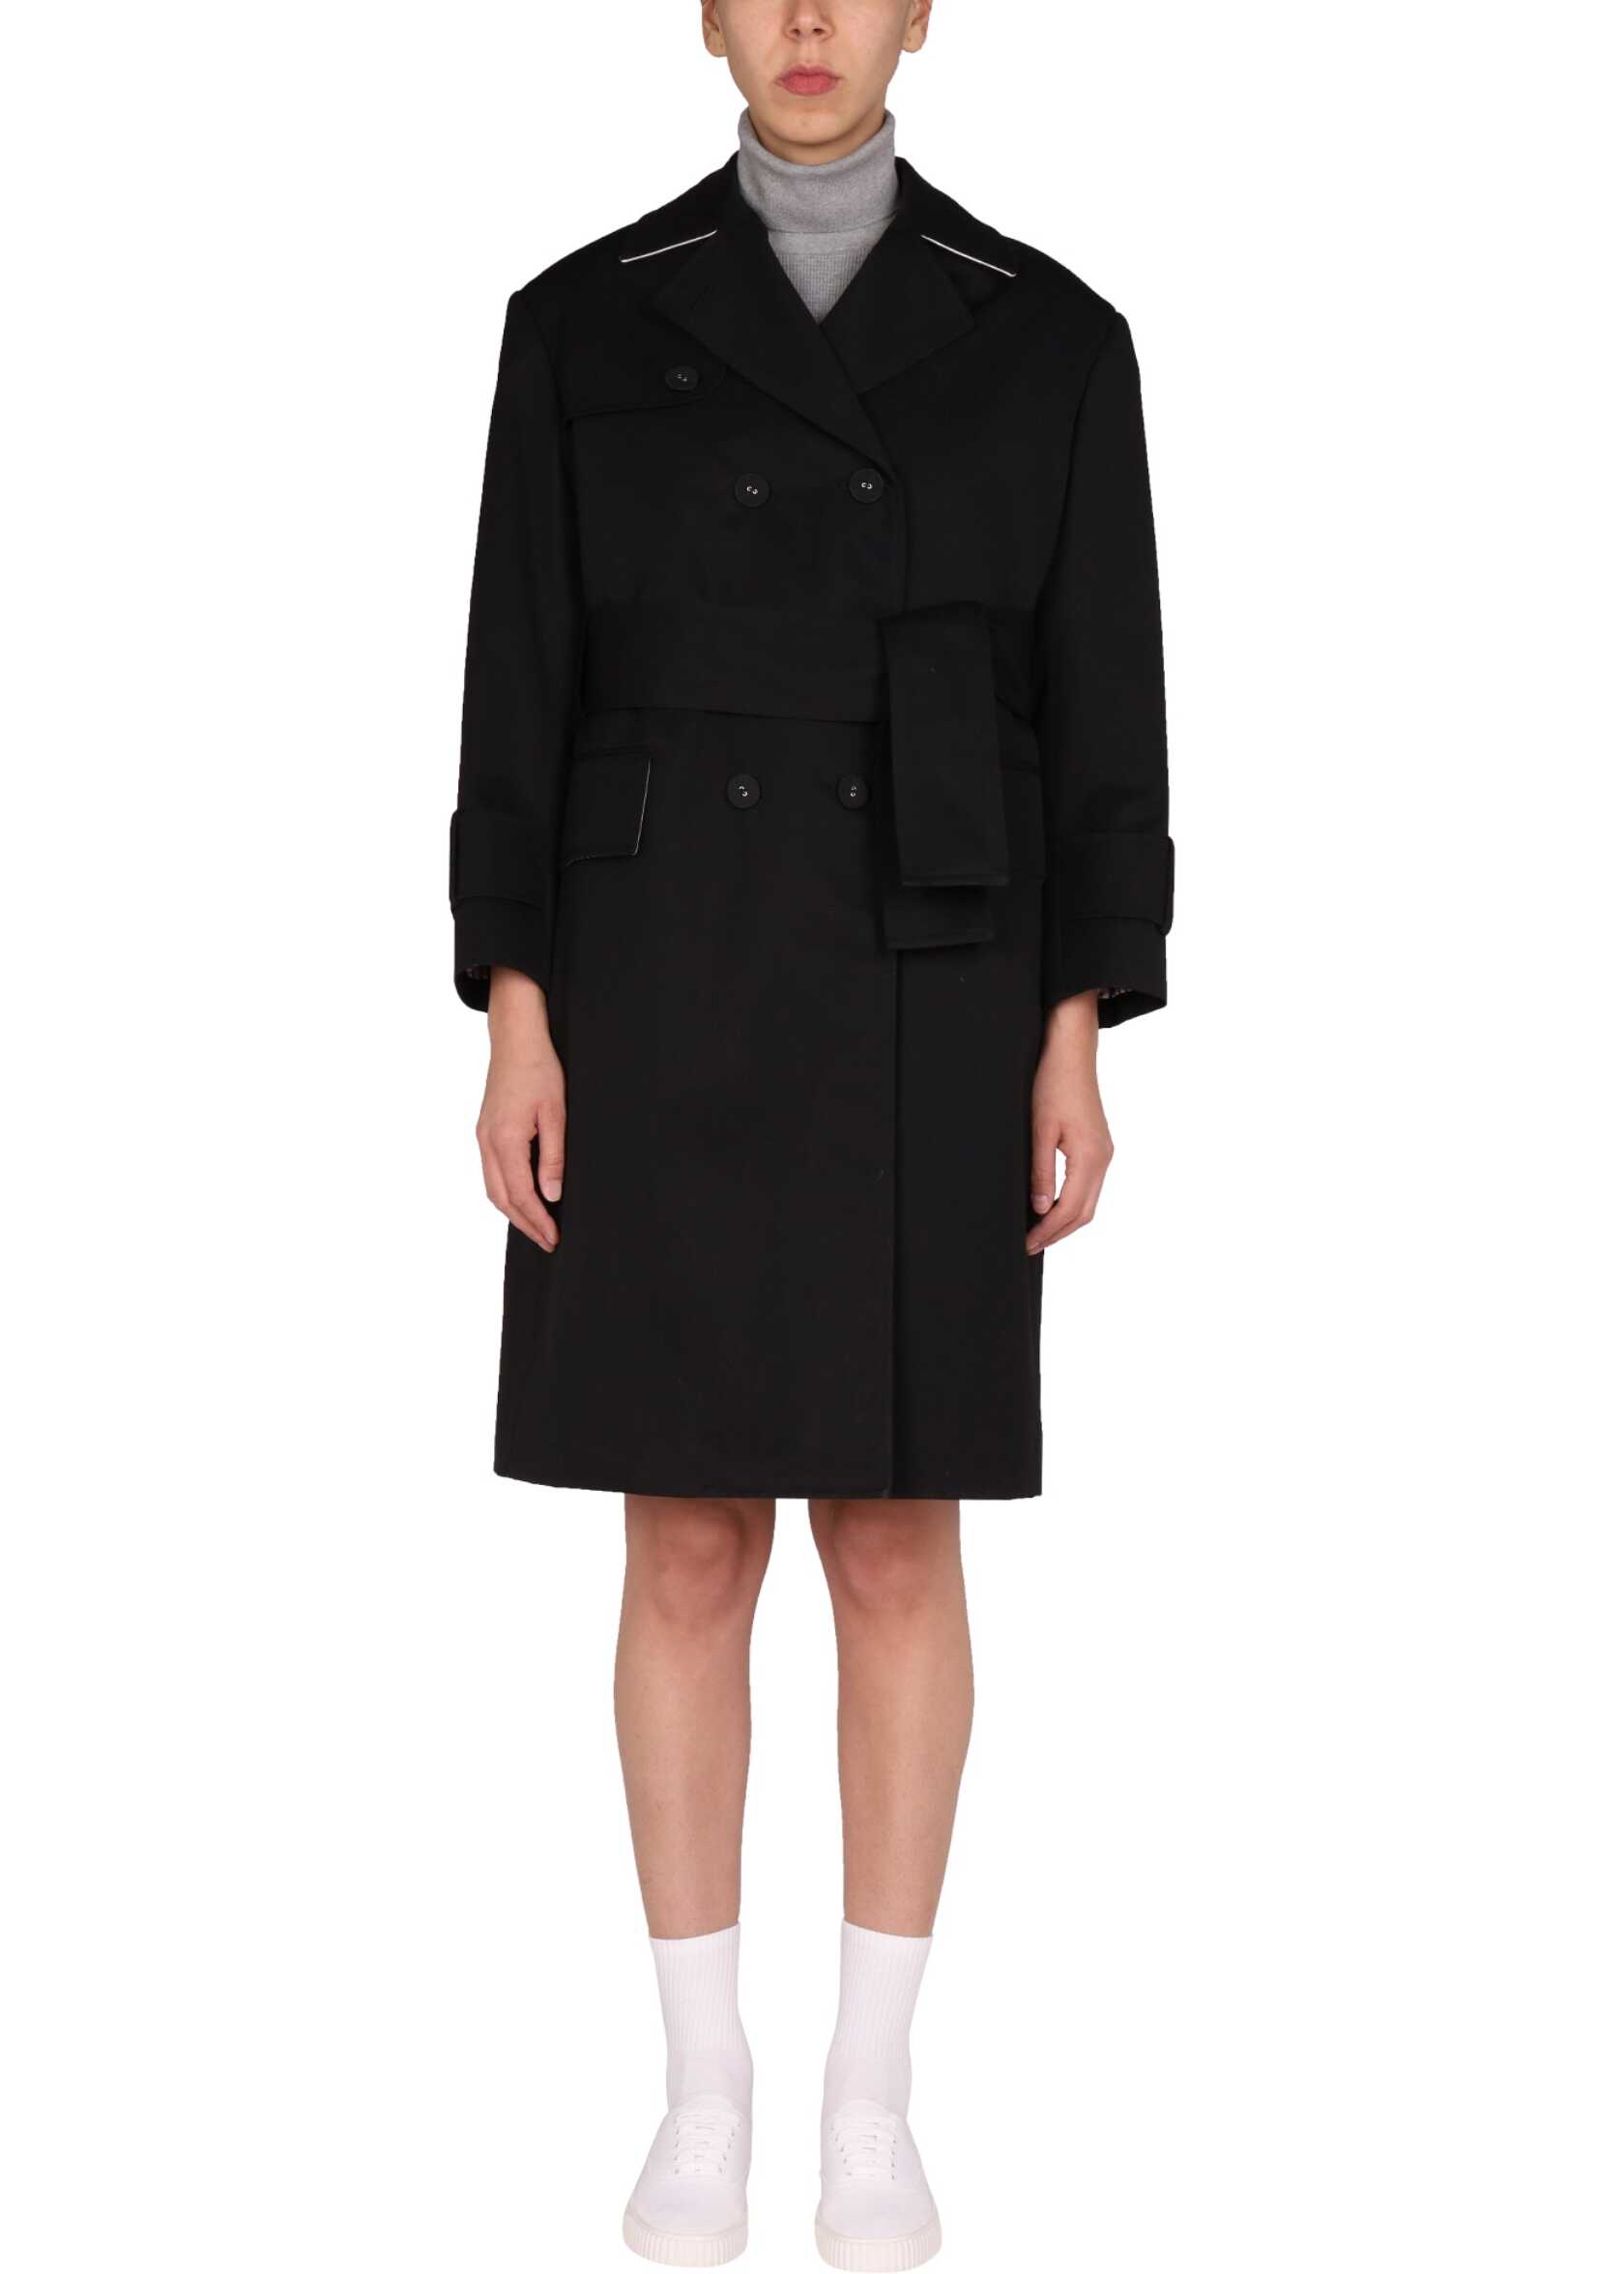 Thom Browne Double-Breasted Trench Coat BLACK image0